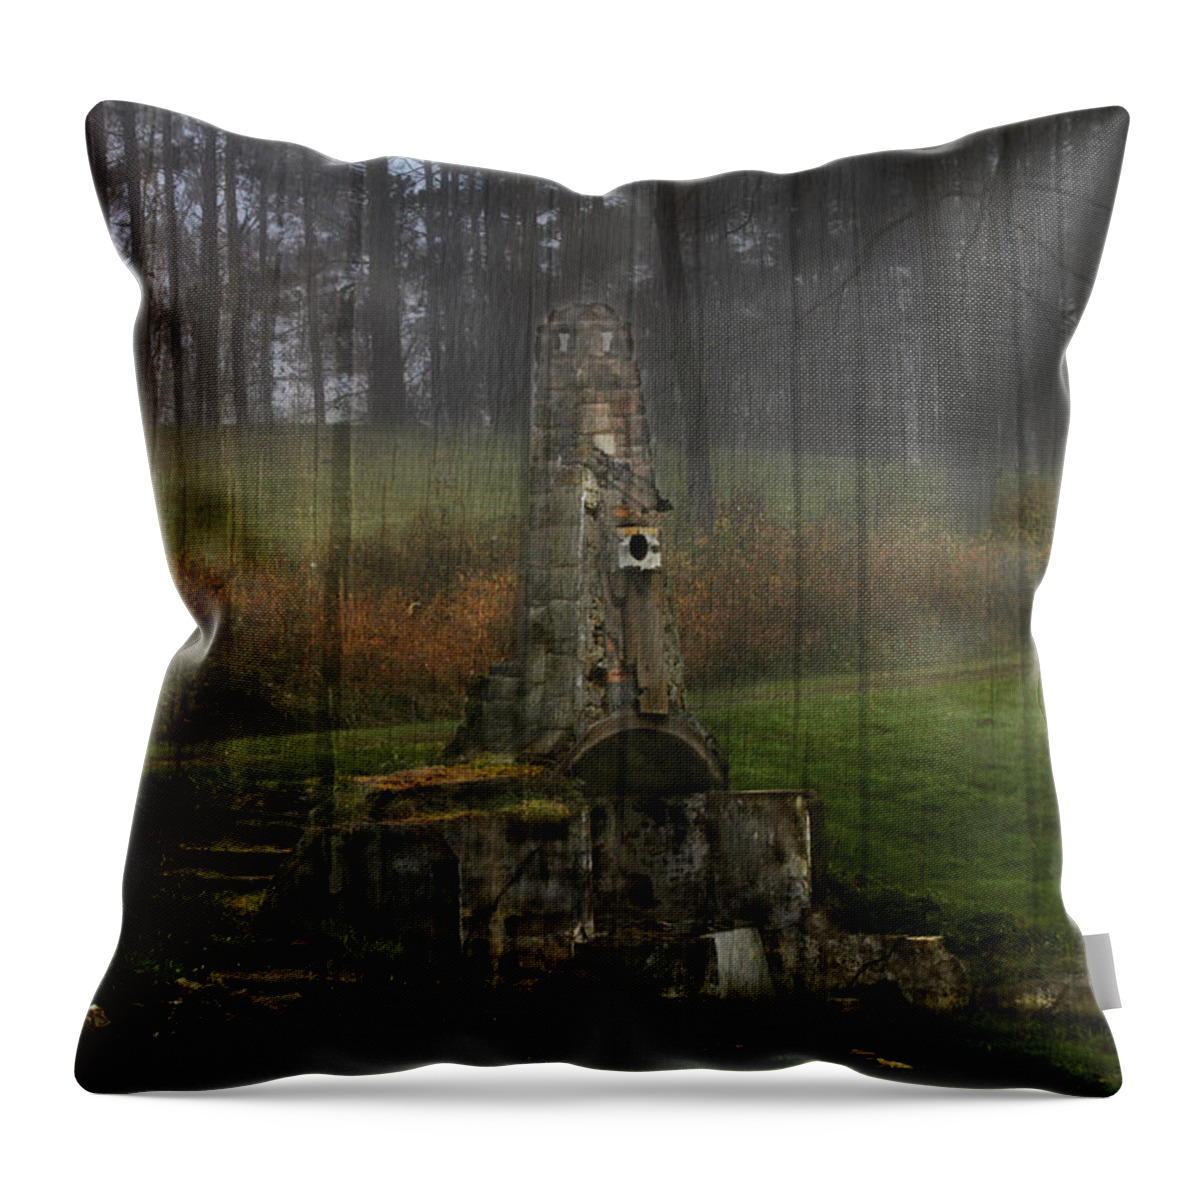 Howard Chandler Christy Throw Pillow featuring the photograph Howard Chandler Christy Ruins by David Yocum